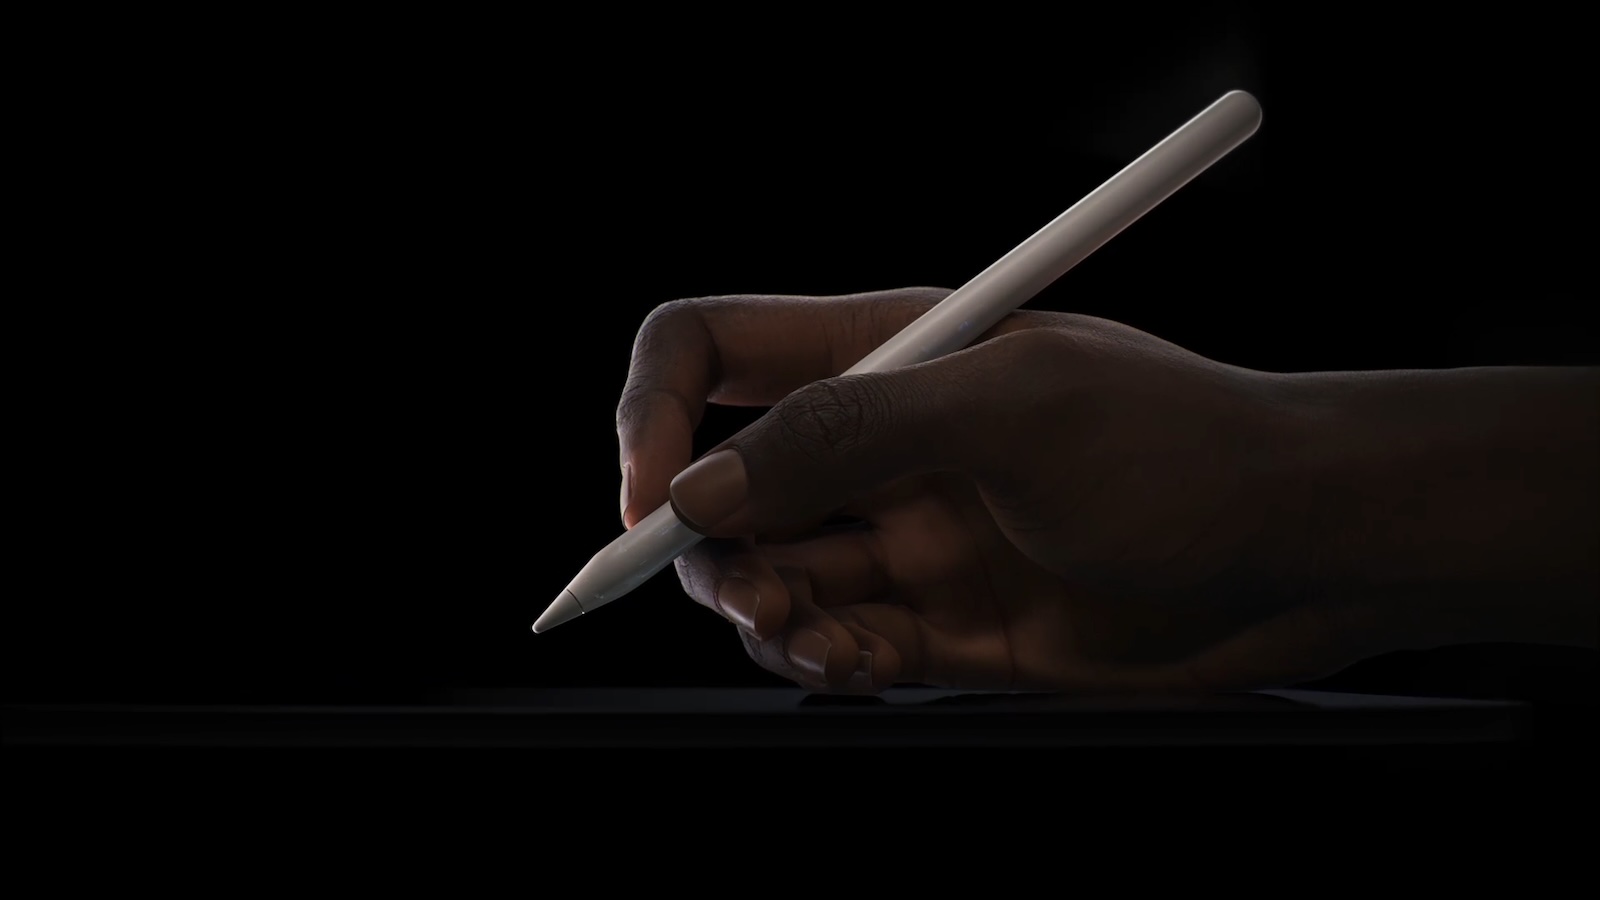 Apple Pencil Pro Unveiled With New Squeeze Gesture, Haptic Feedback, Find My, and More